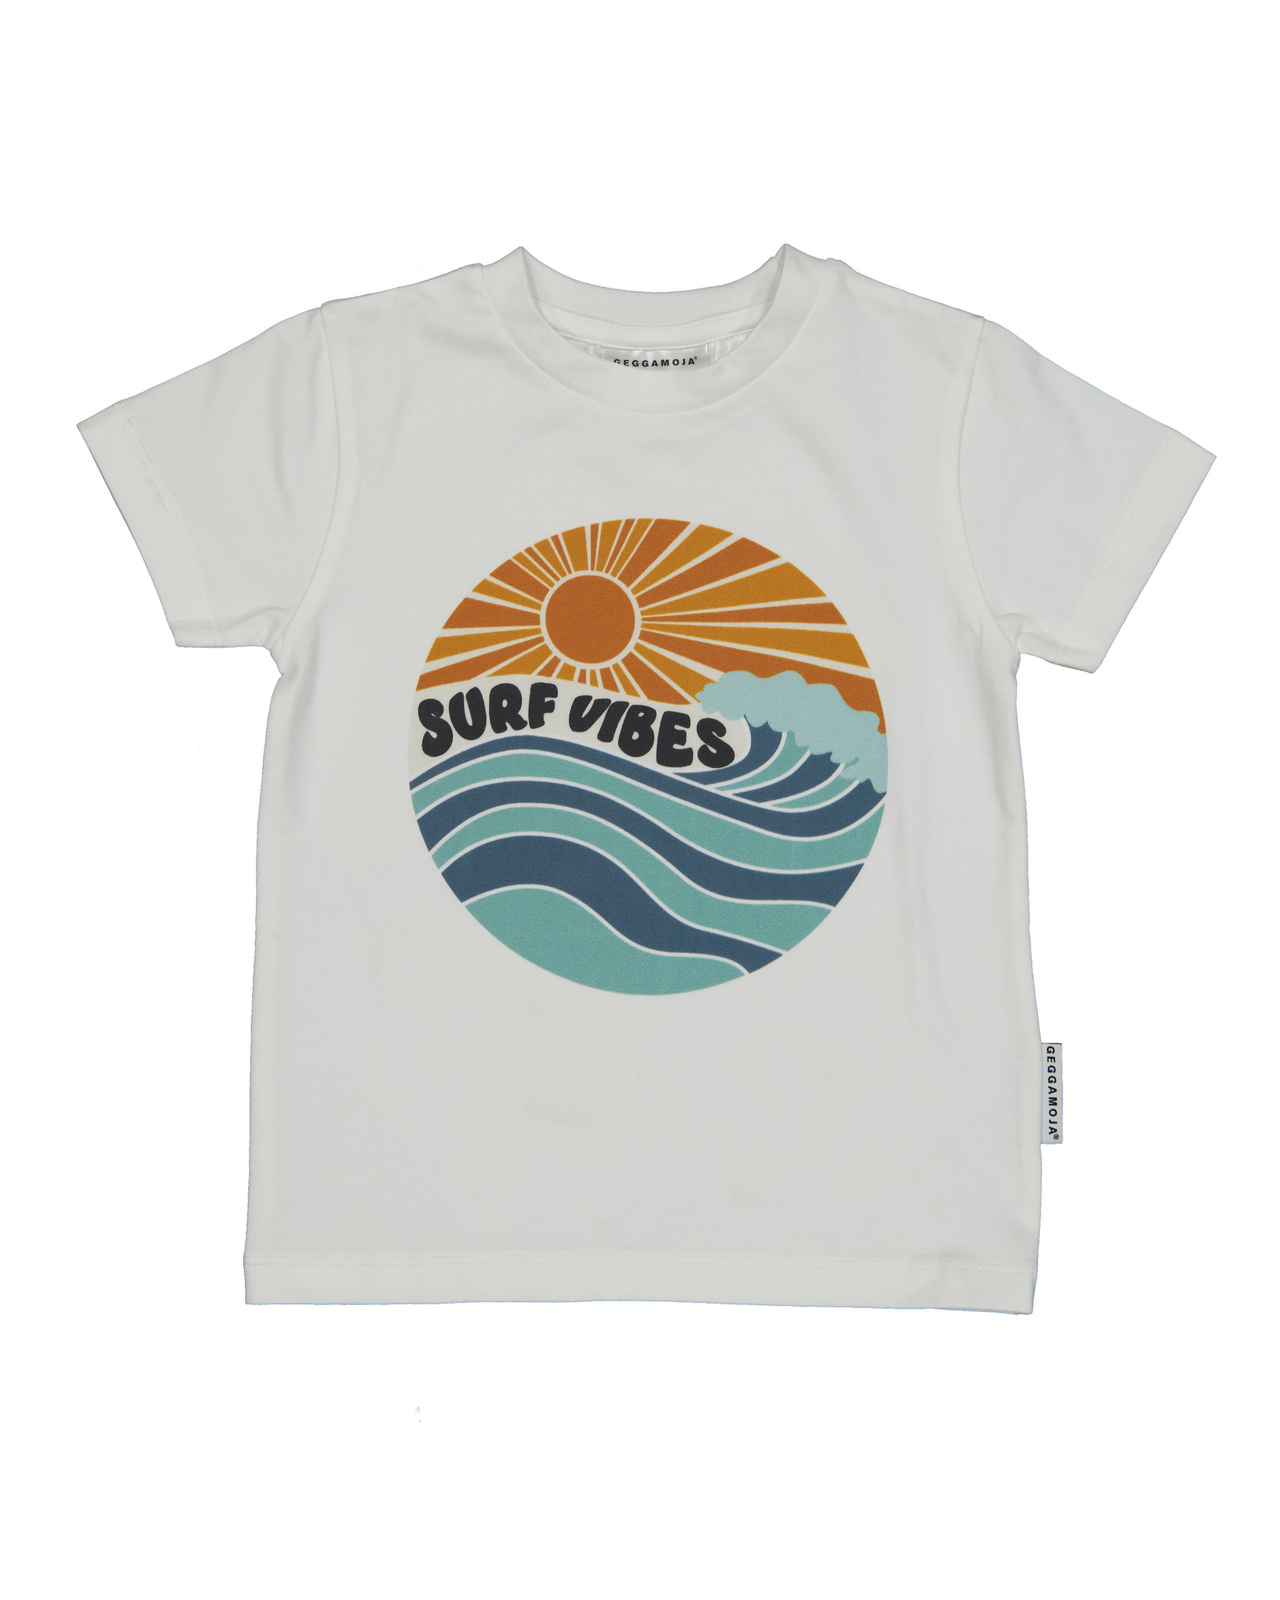 T-shirt Surf vibes Offwhite 110/116